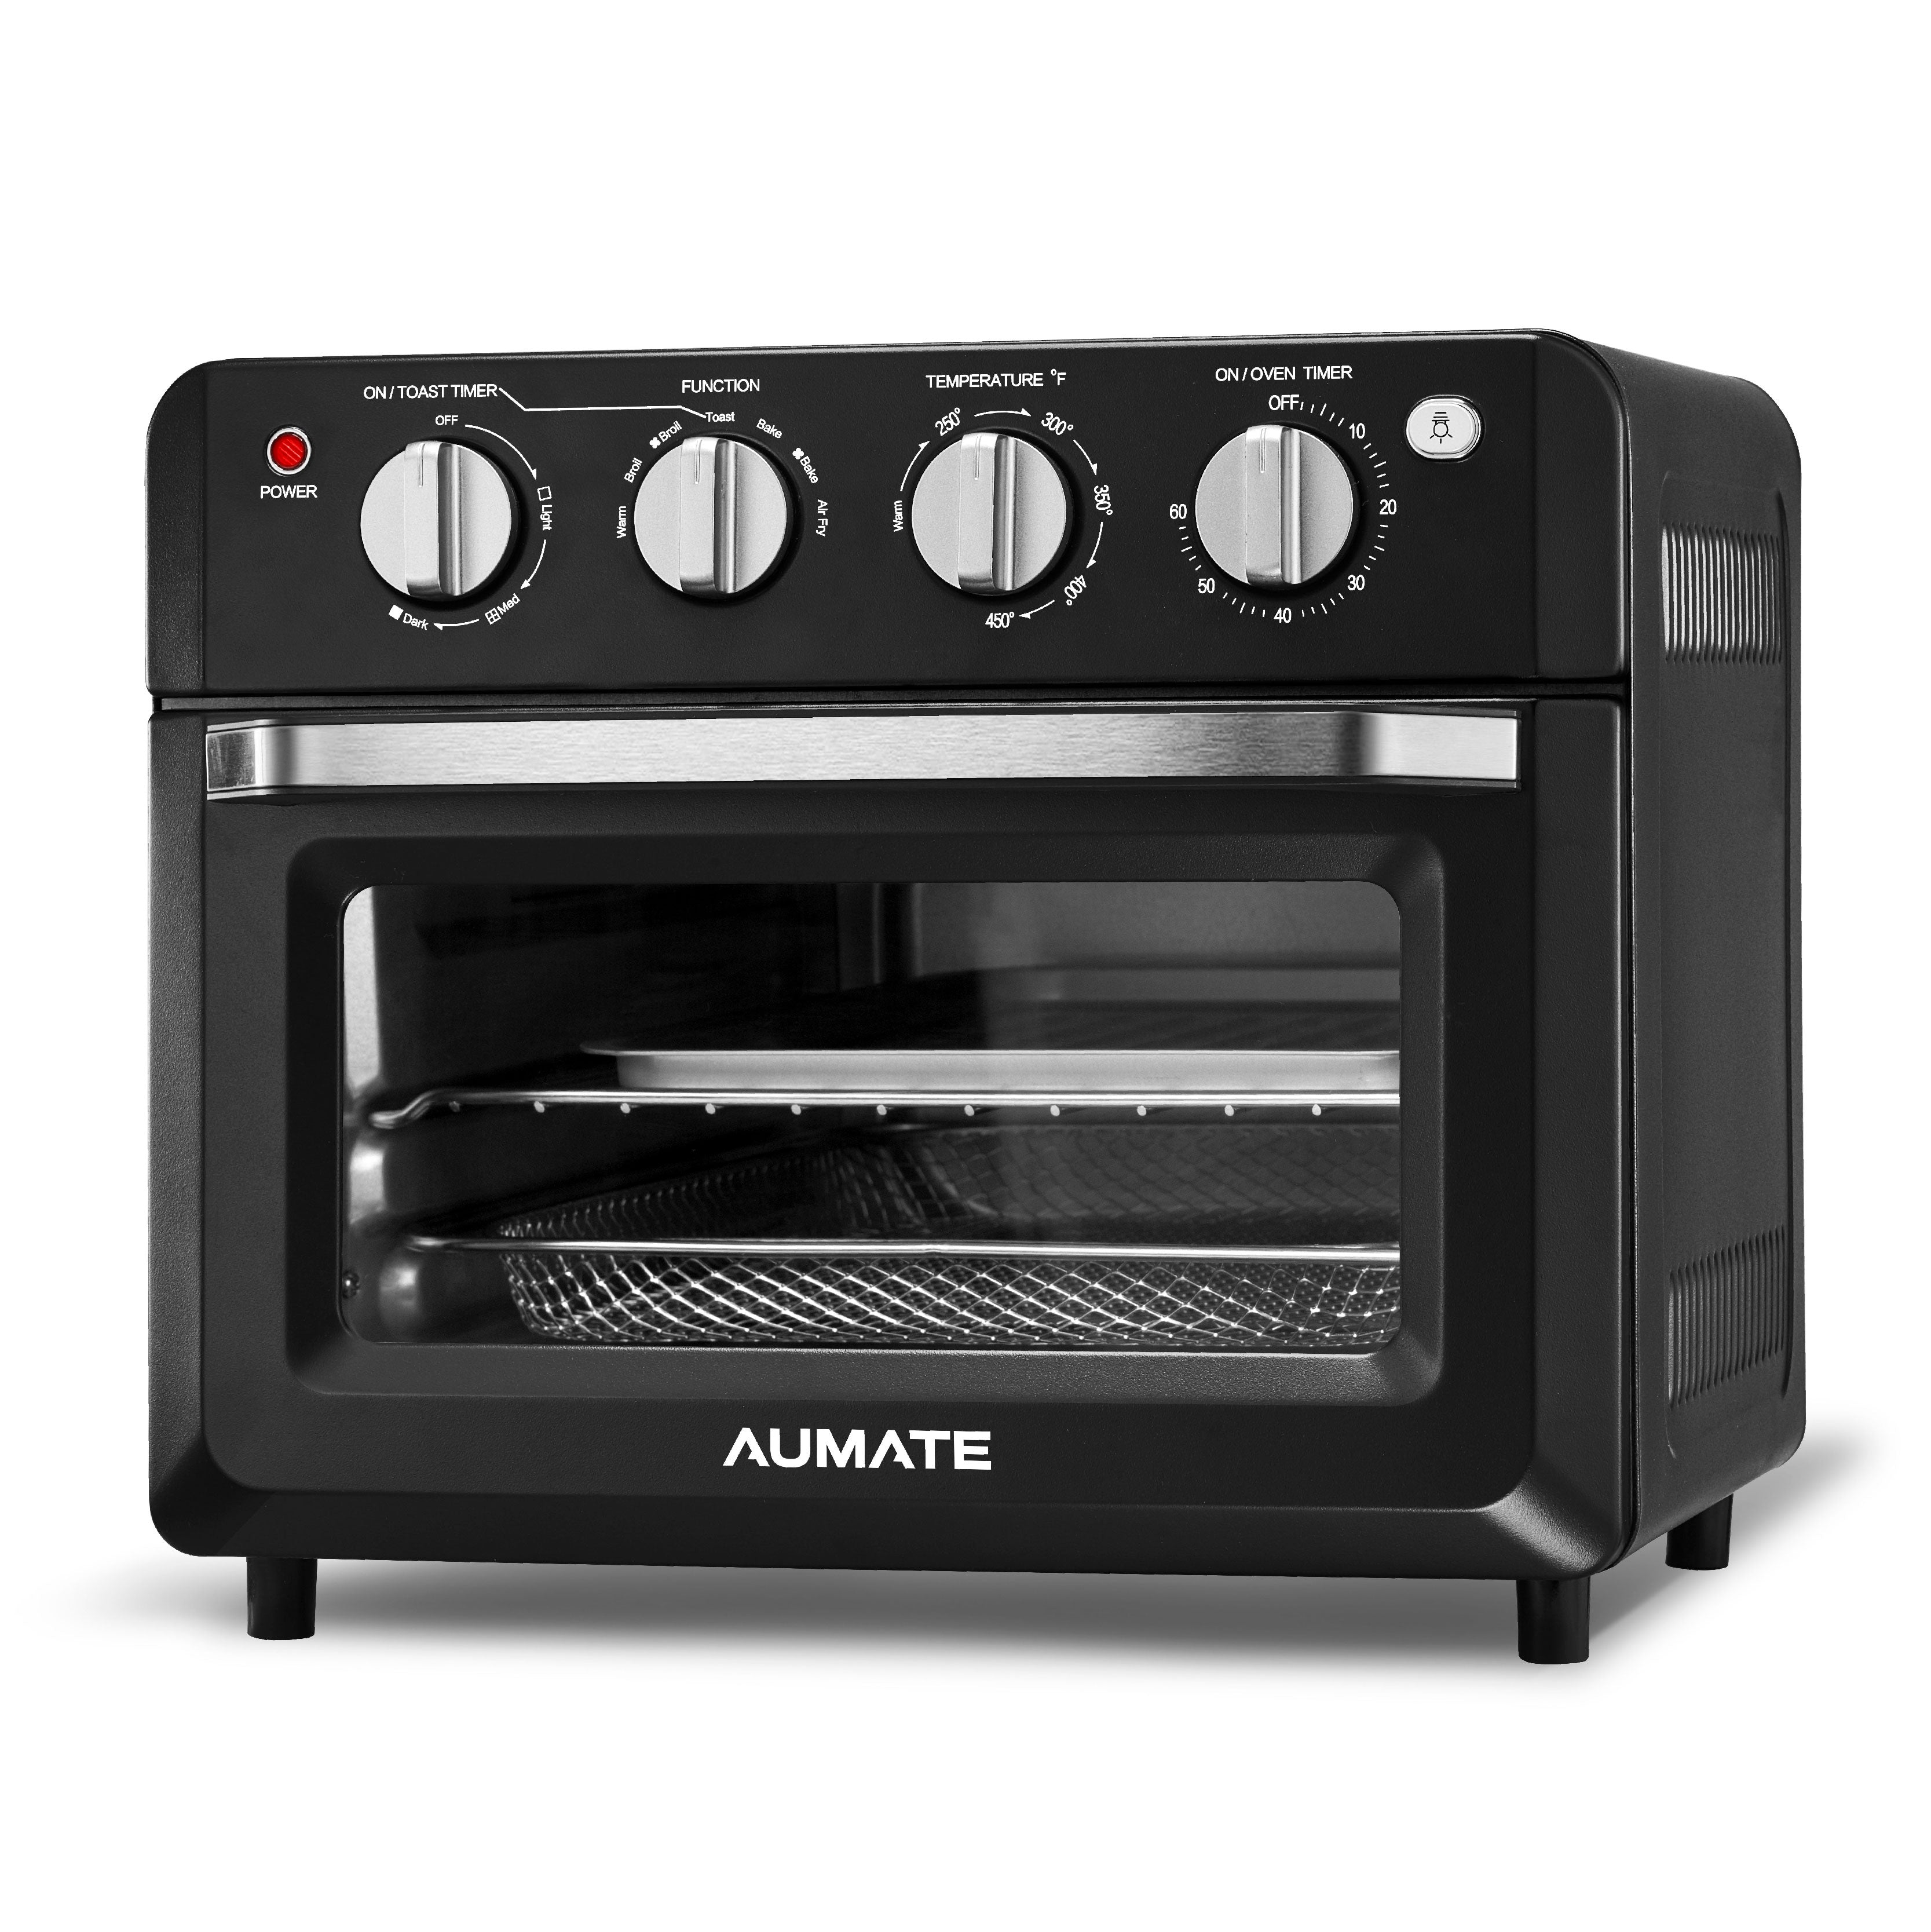 AUMATE T05712A-AL 7-in-1 Toaster Oven Air Fryer Convection Combo 19qt 1550w  SS